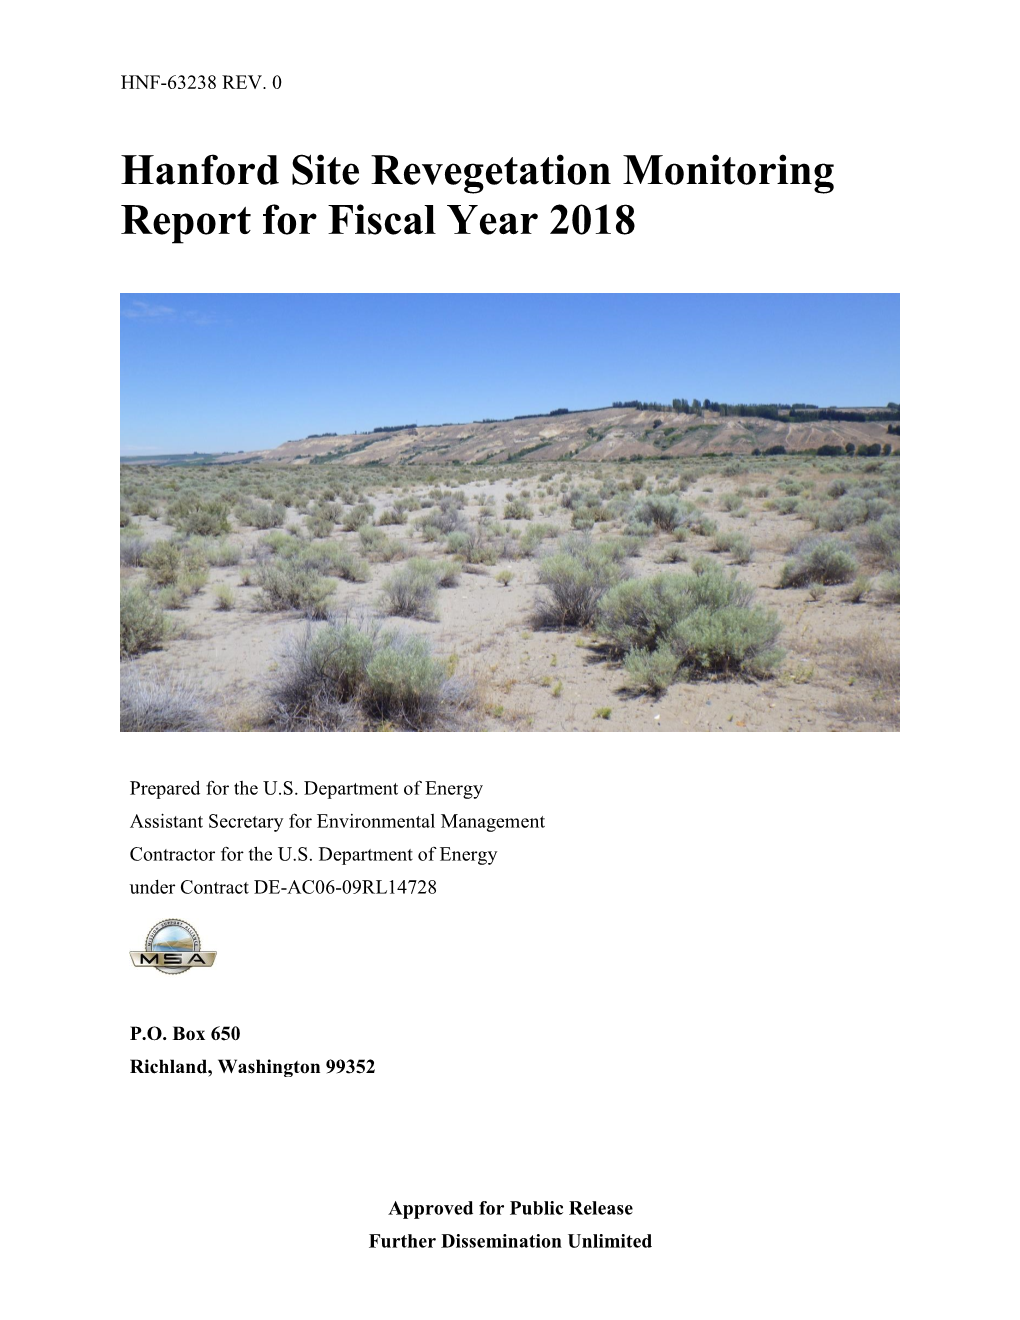 Hanford Site Revegetation Monitoring Report for Fiscal Year 2018